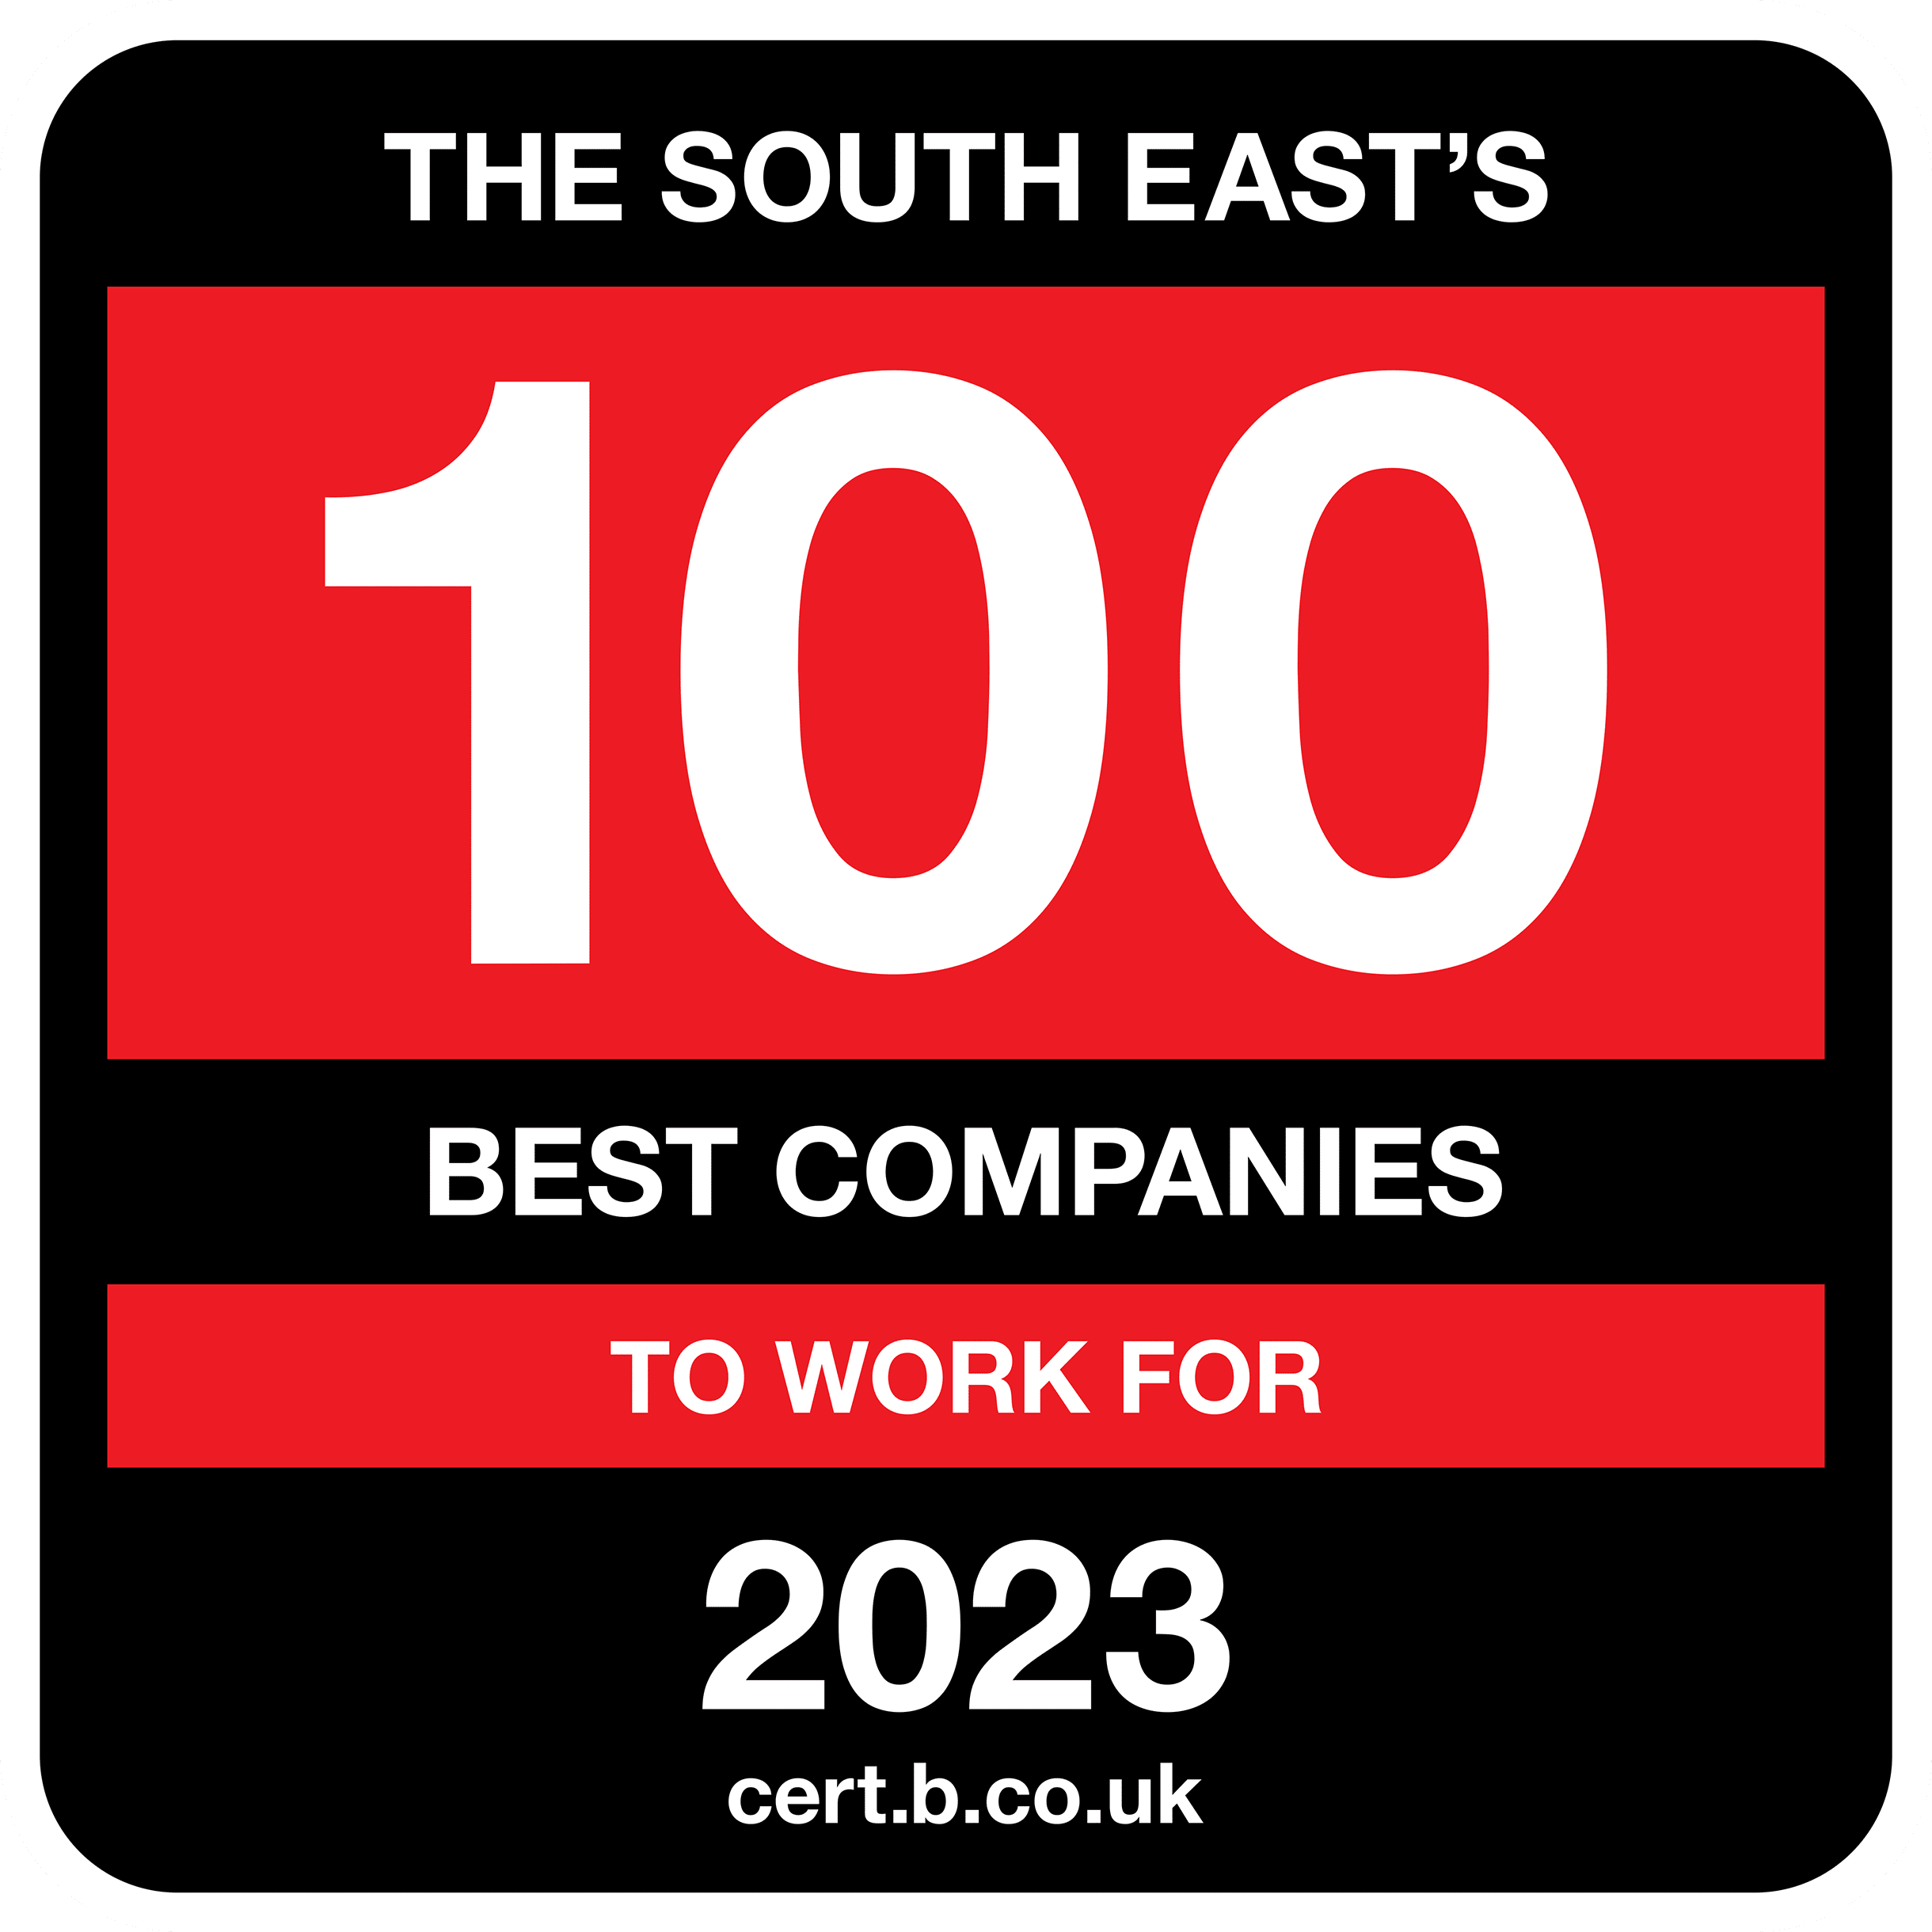 The South East's Best Companies to work for 2023